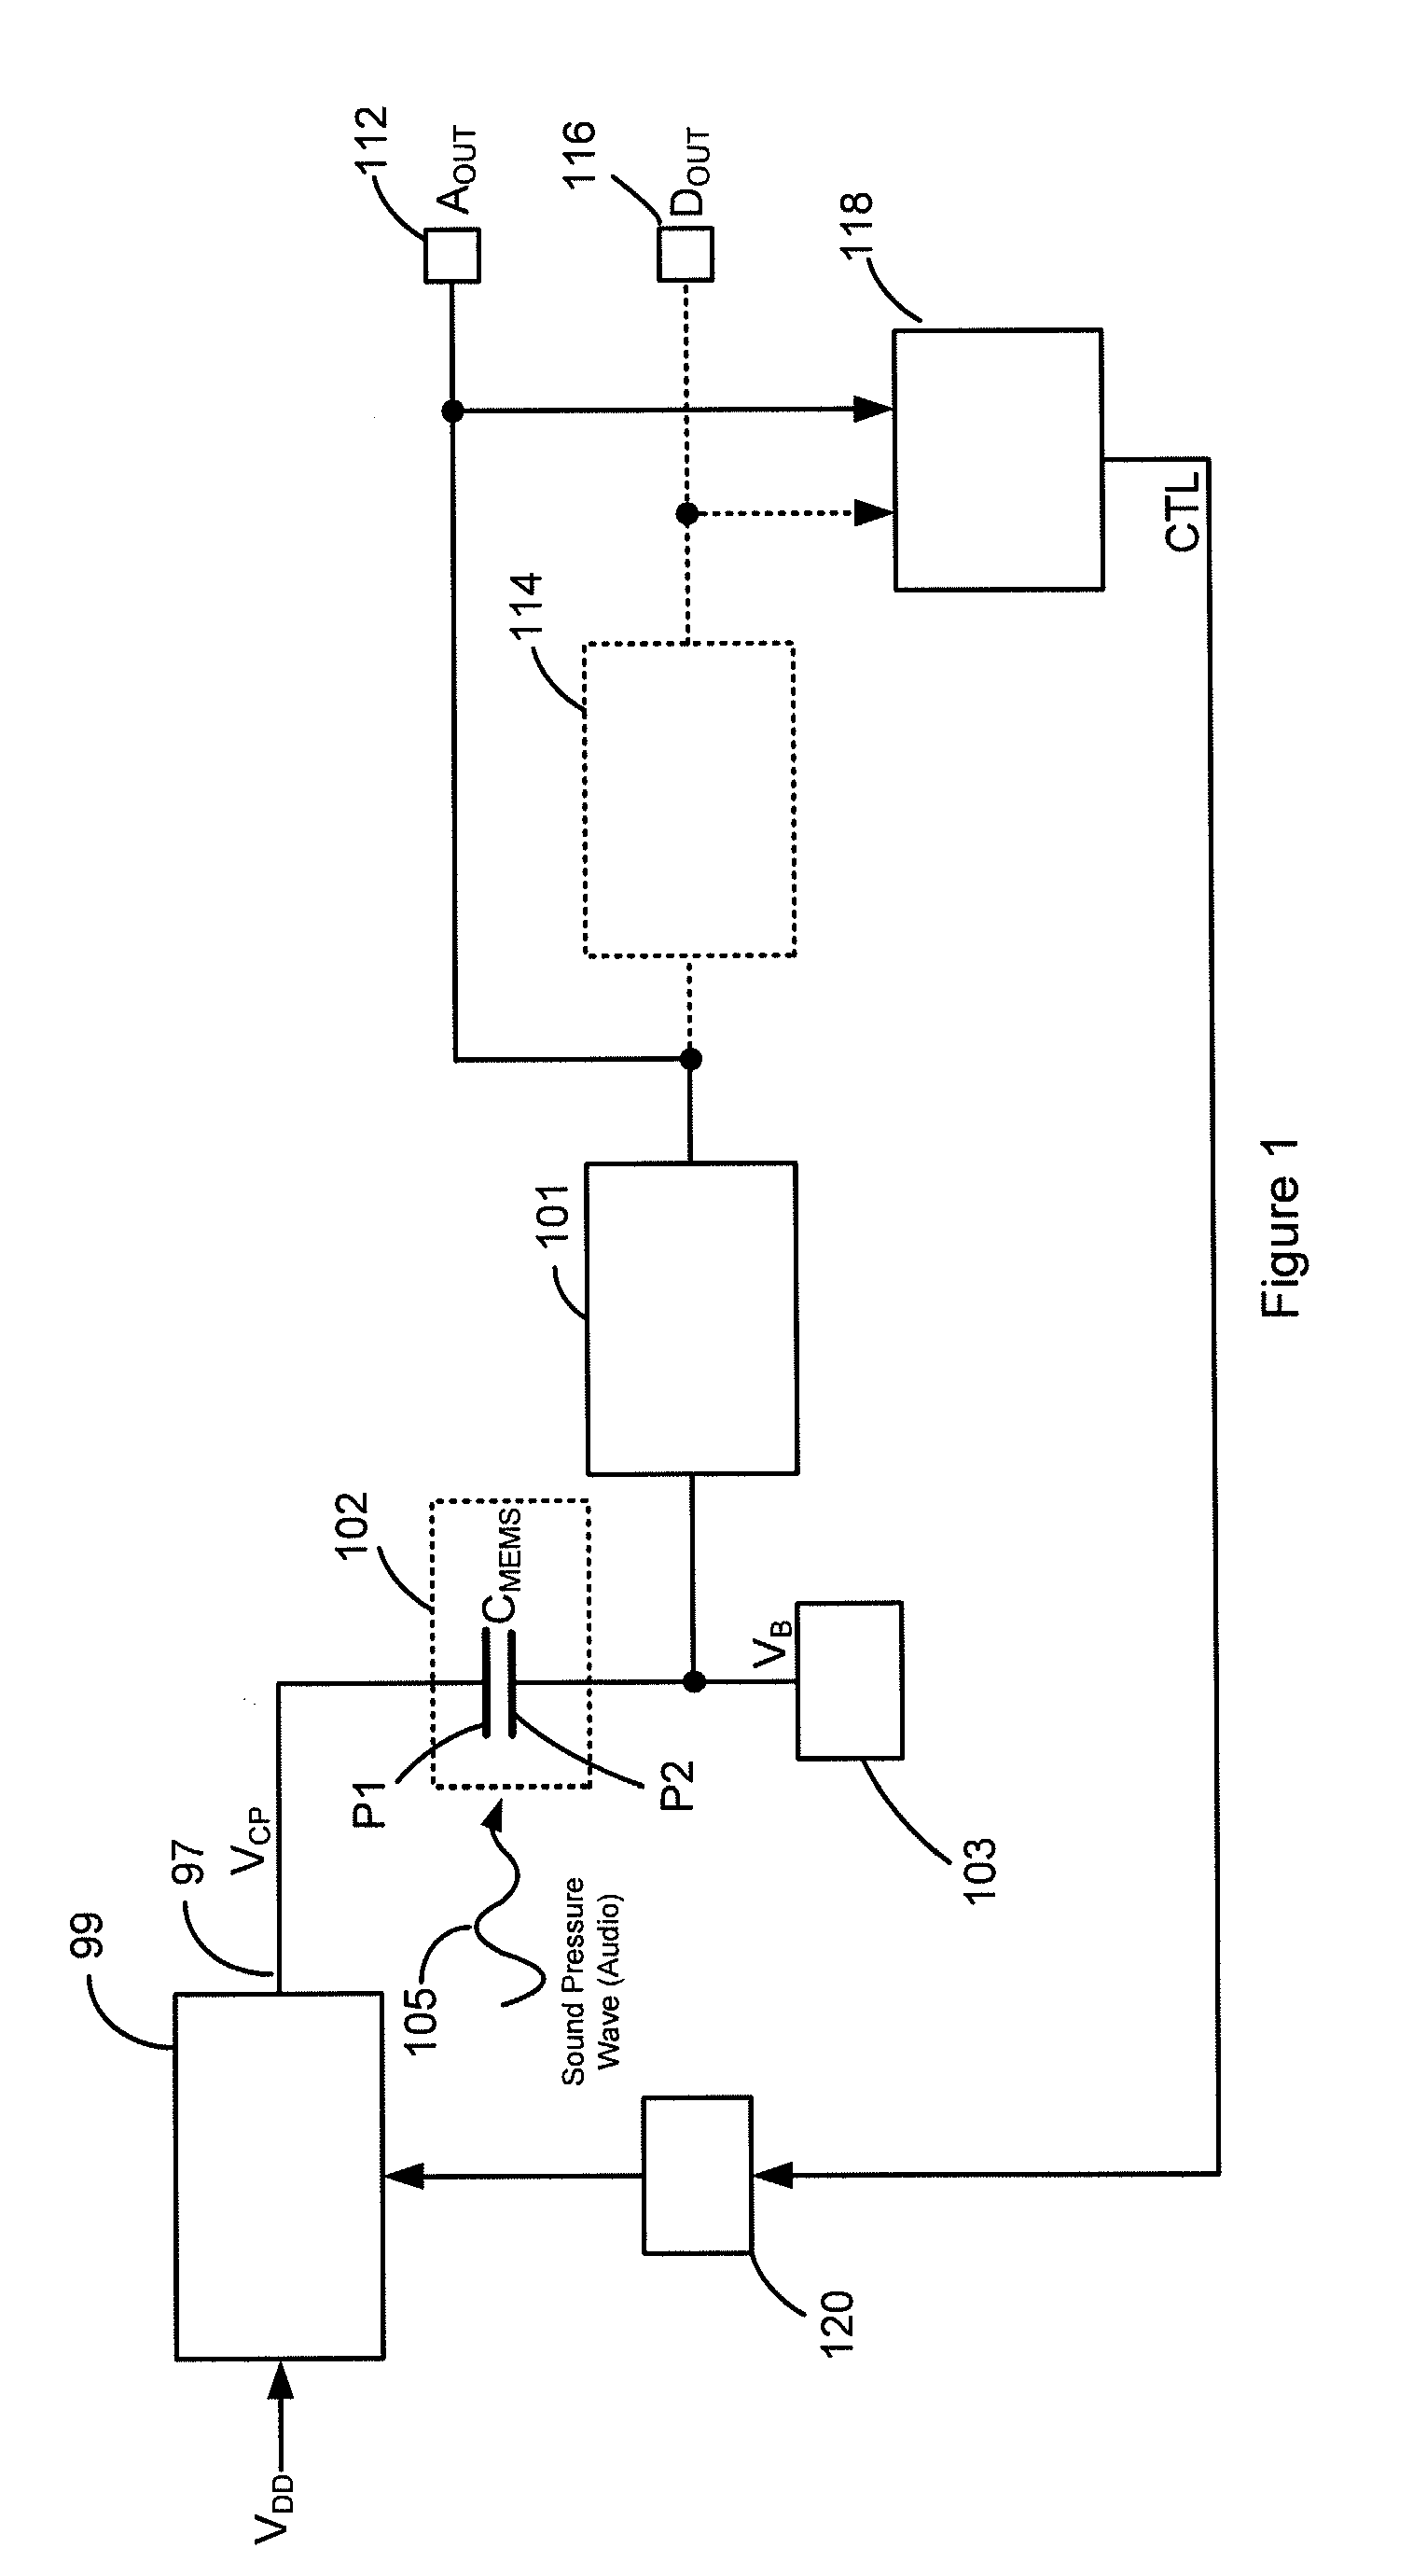 Apparatus and method for biasing a transducer